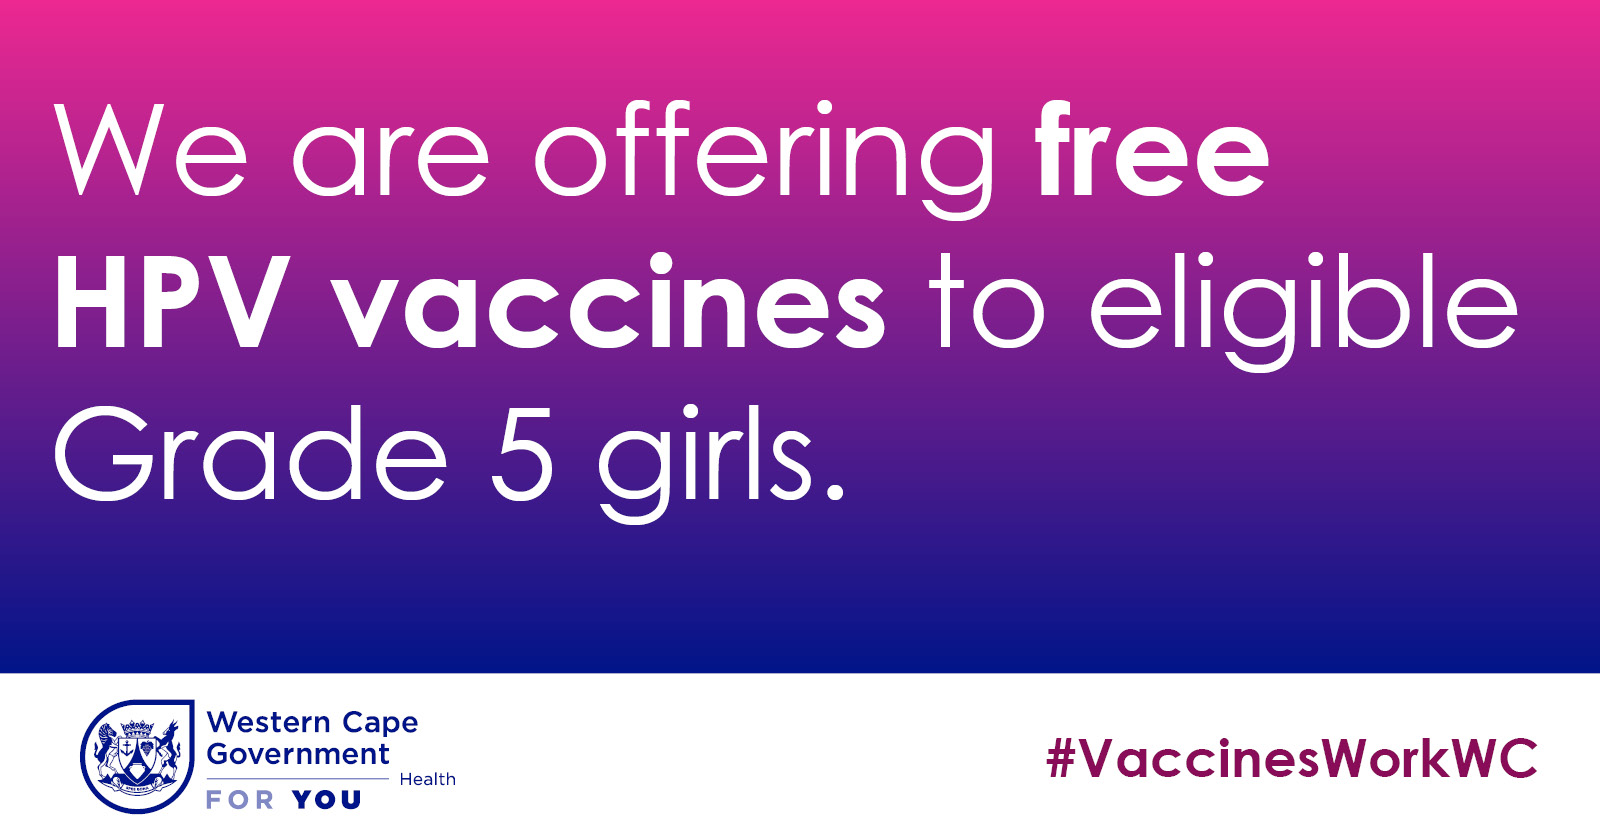 Western Cape Government Free HPV vaccination 2022 #VaccinesWork